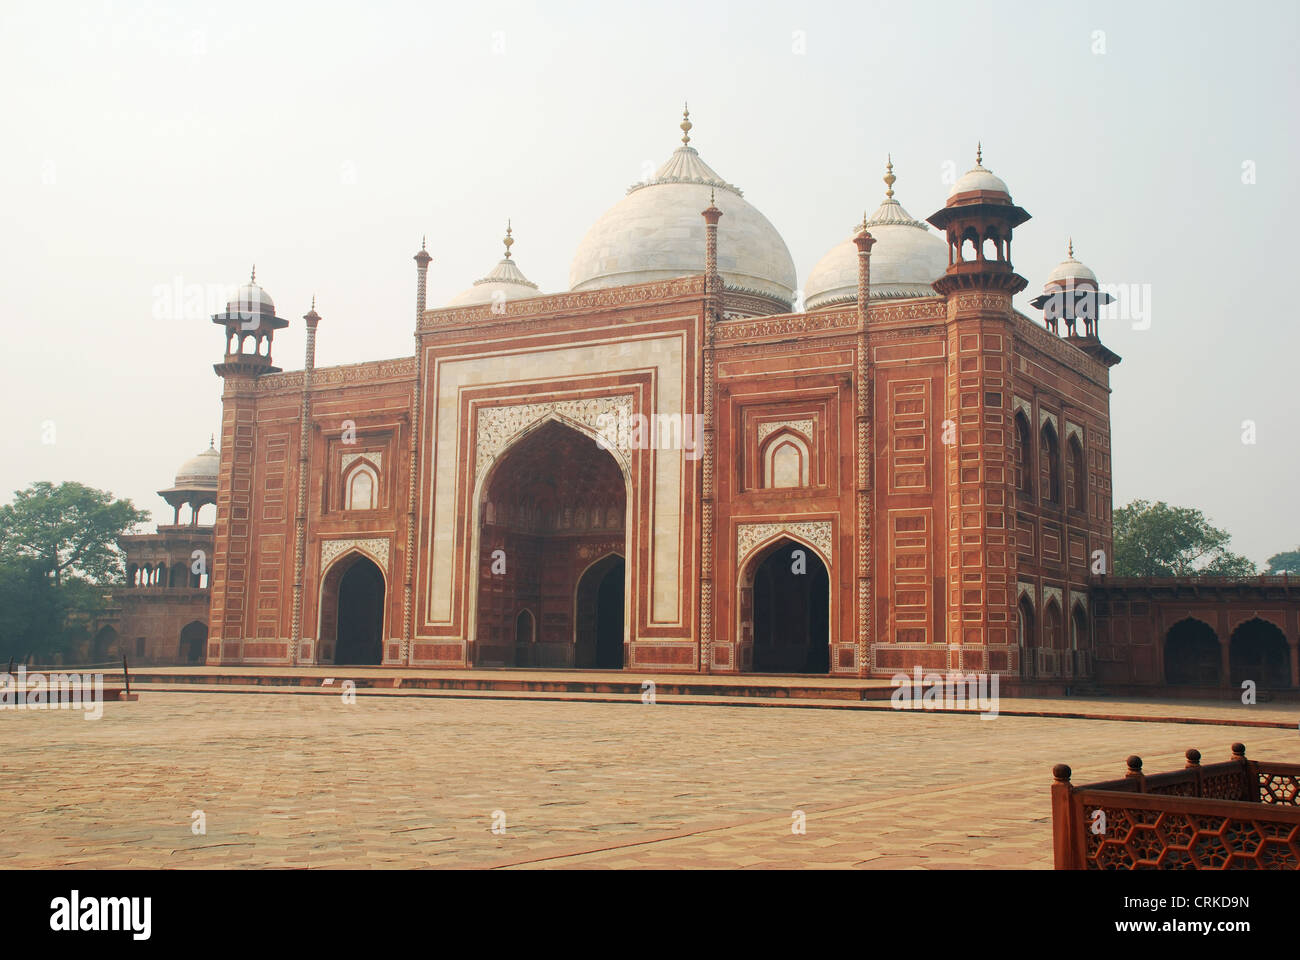 Mosque or Masjid, built in red sandstone and marble west of the Taj Mahal, Agra, Uttar Pradesh, India Stock Photo